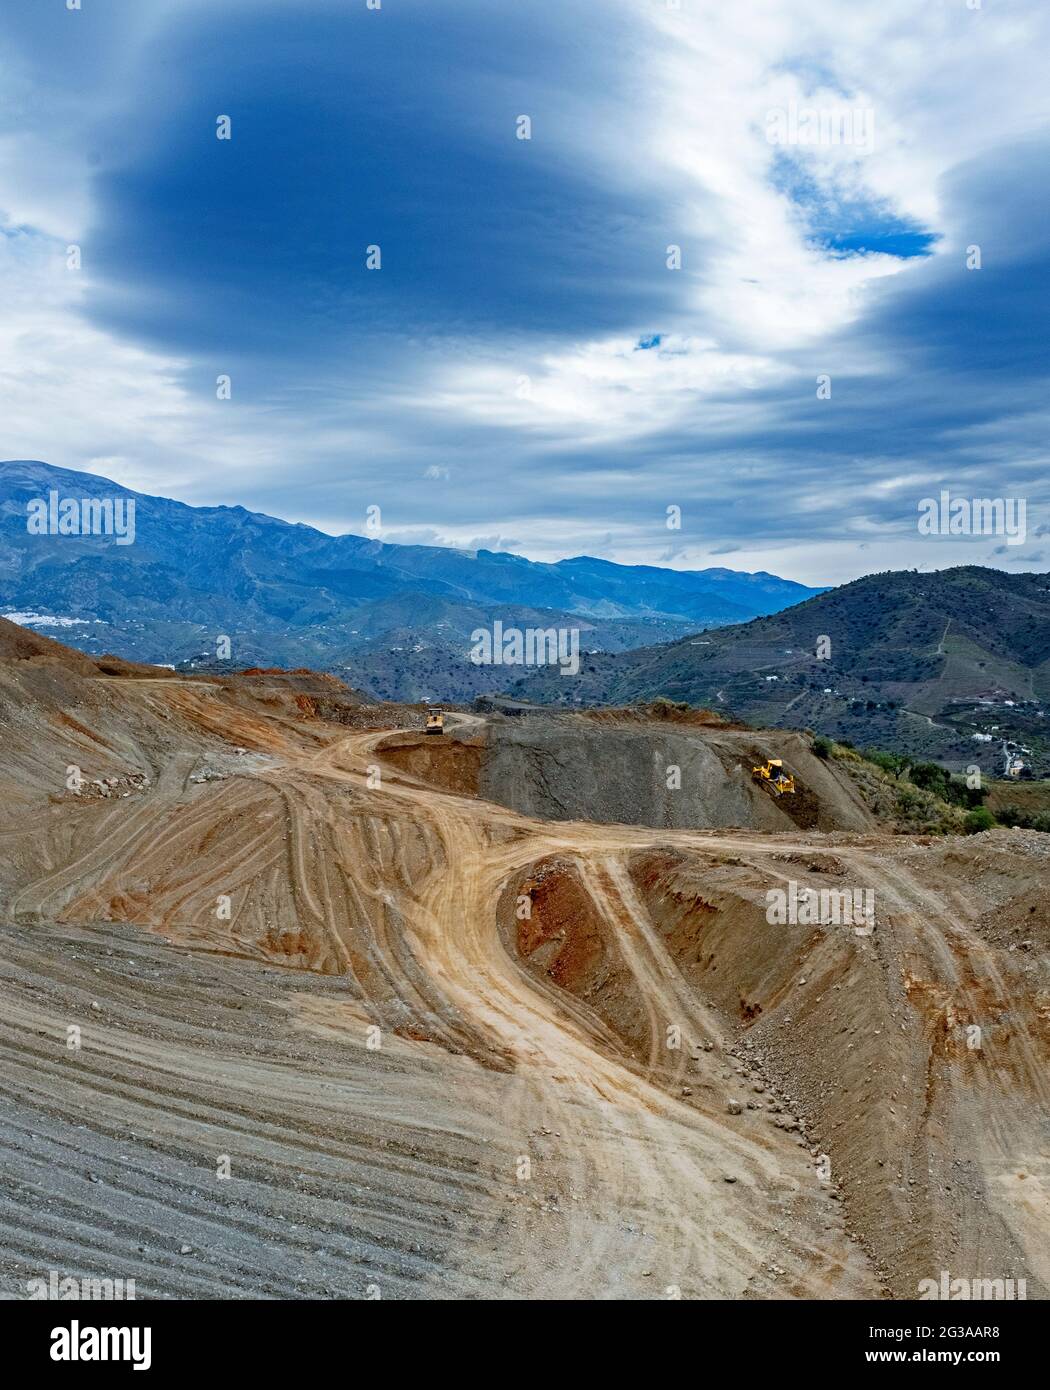 Diggers clearing ground for horticulture above Velez Malaga, Malaga Province, Andalucia, Spain Stock Photo